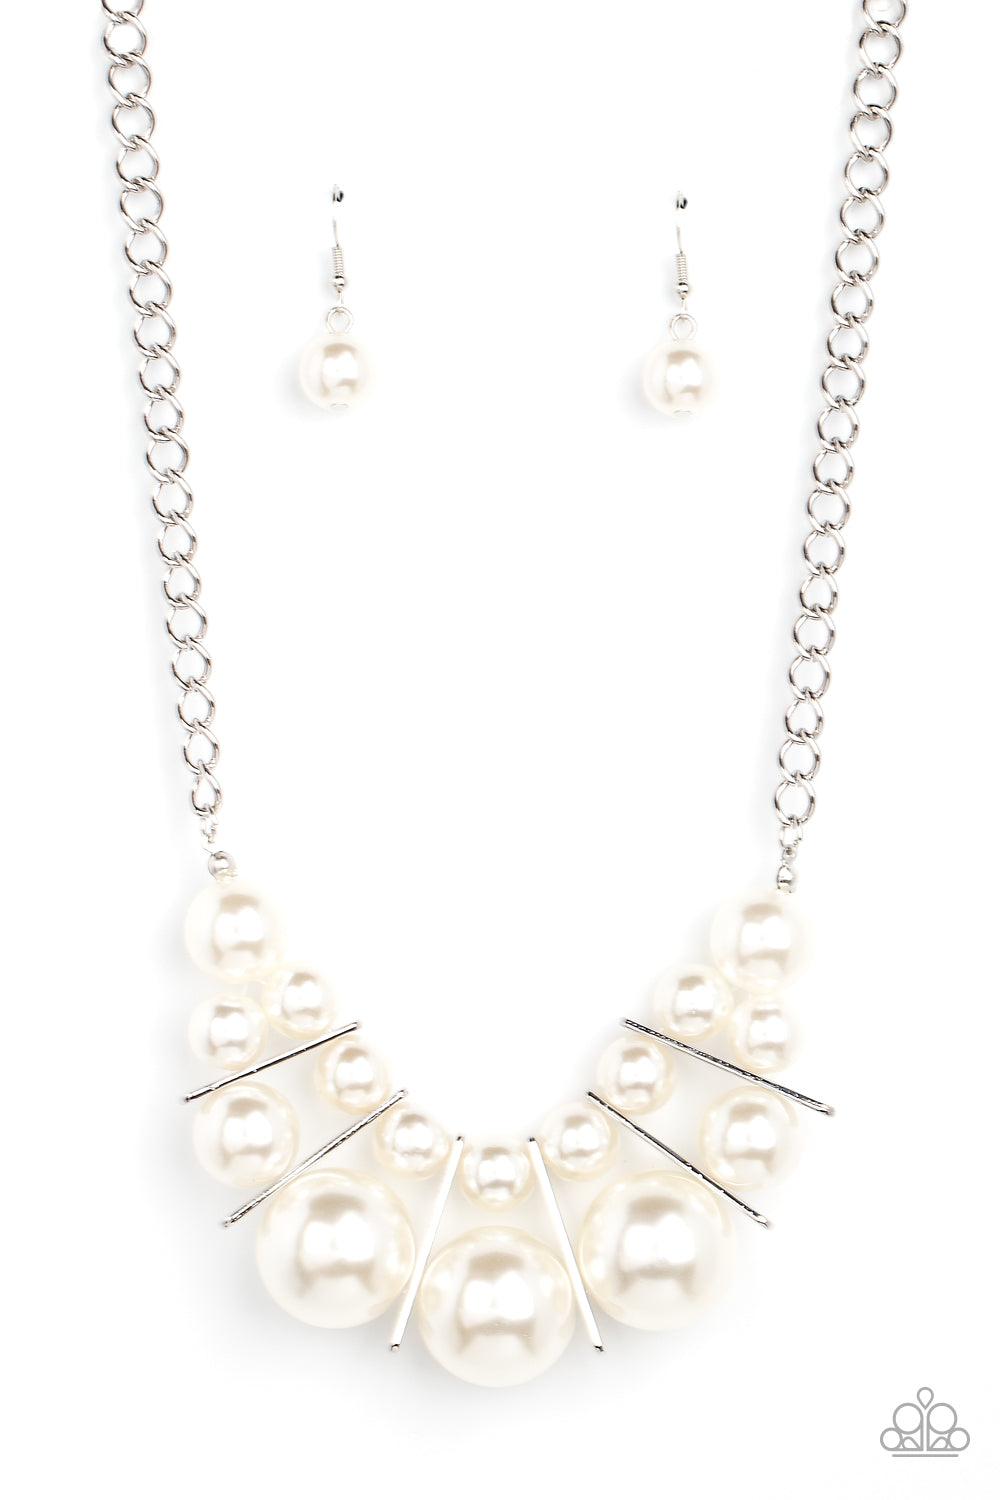 Paparazzi Accessories Challenge Accepted - White Separated by rectangular silver frames, bubbly rows of classic and oversized white pearls are threaded along invisible wires at the bottom of a chunky silver chain for an effervescent explosion below the co